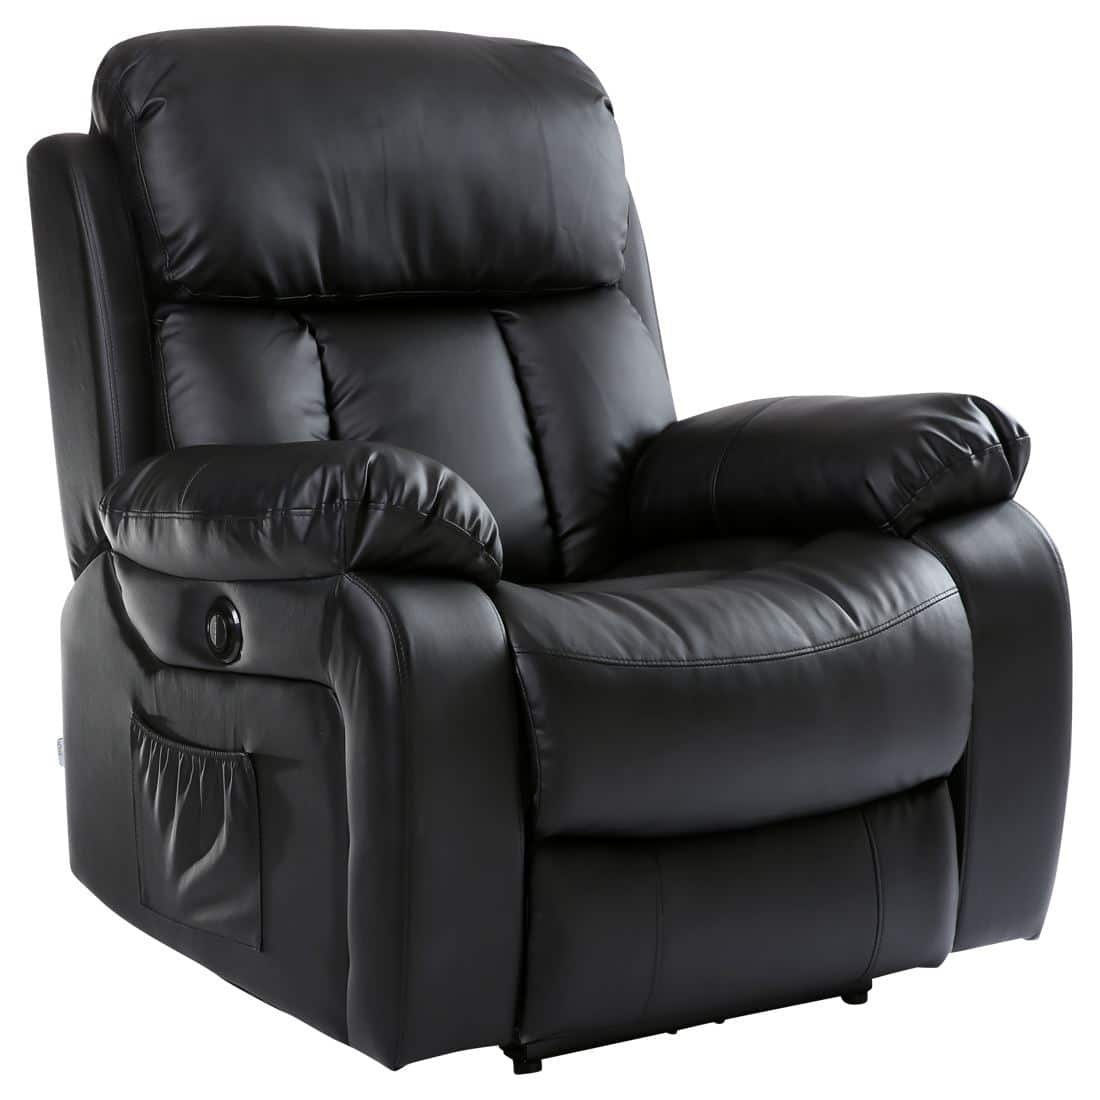 CHESTER ELECTRIC HEATED LEATHER MASSAGE RECLINER CHAIR SOFA GAMING HOME ...